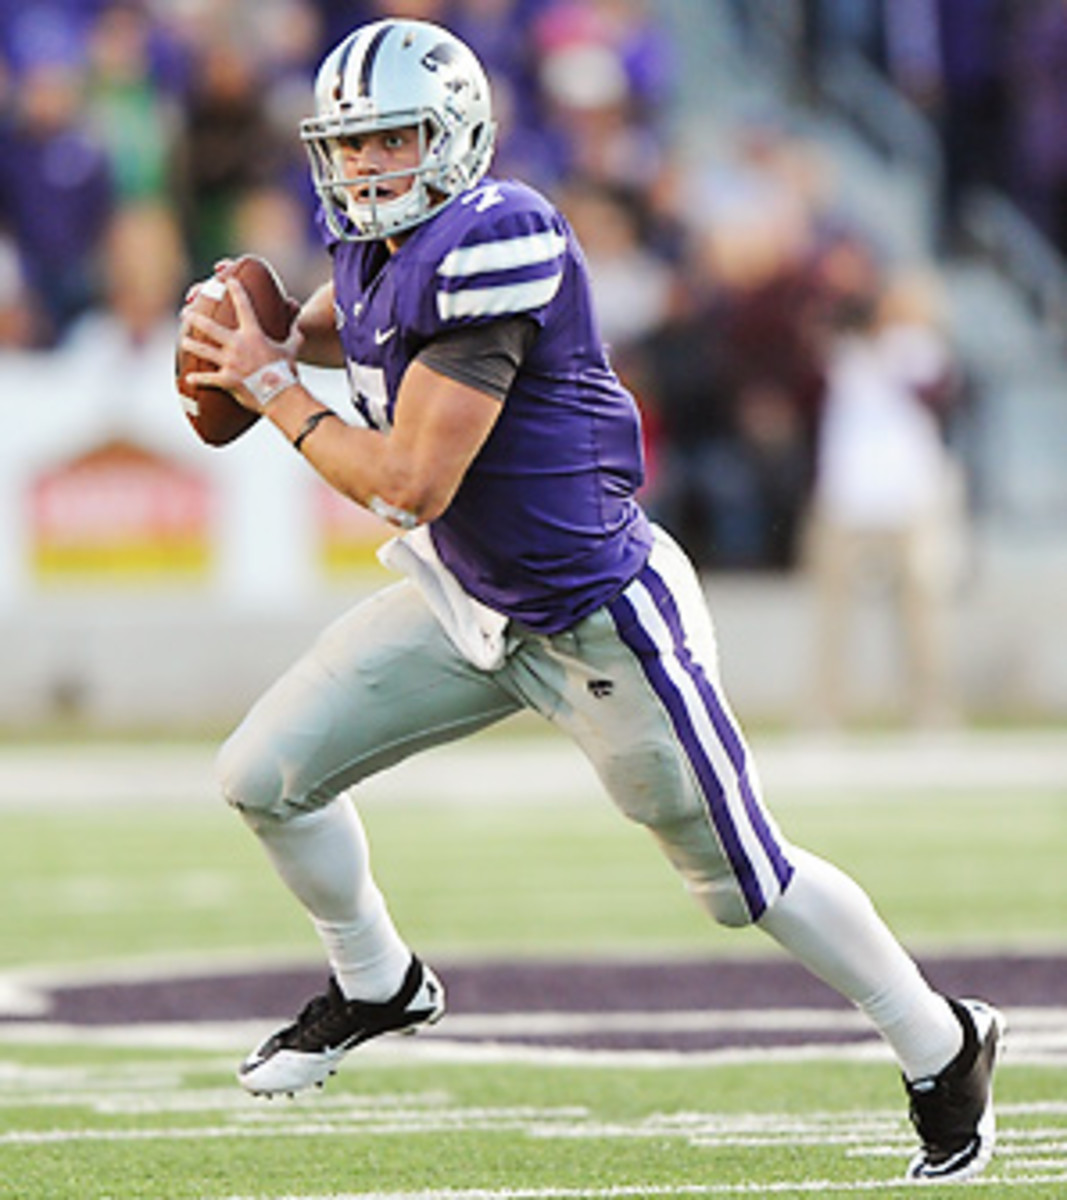 George Schroeder: Focused on faith, family, football, Collin Klein out to  surprise again - Sports Illustrated